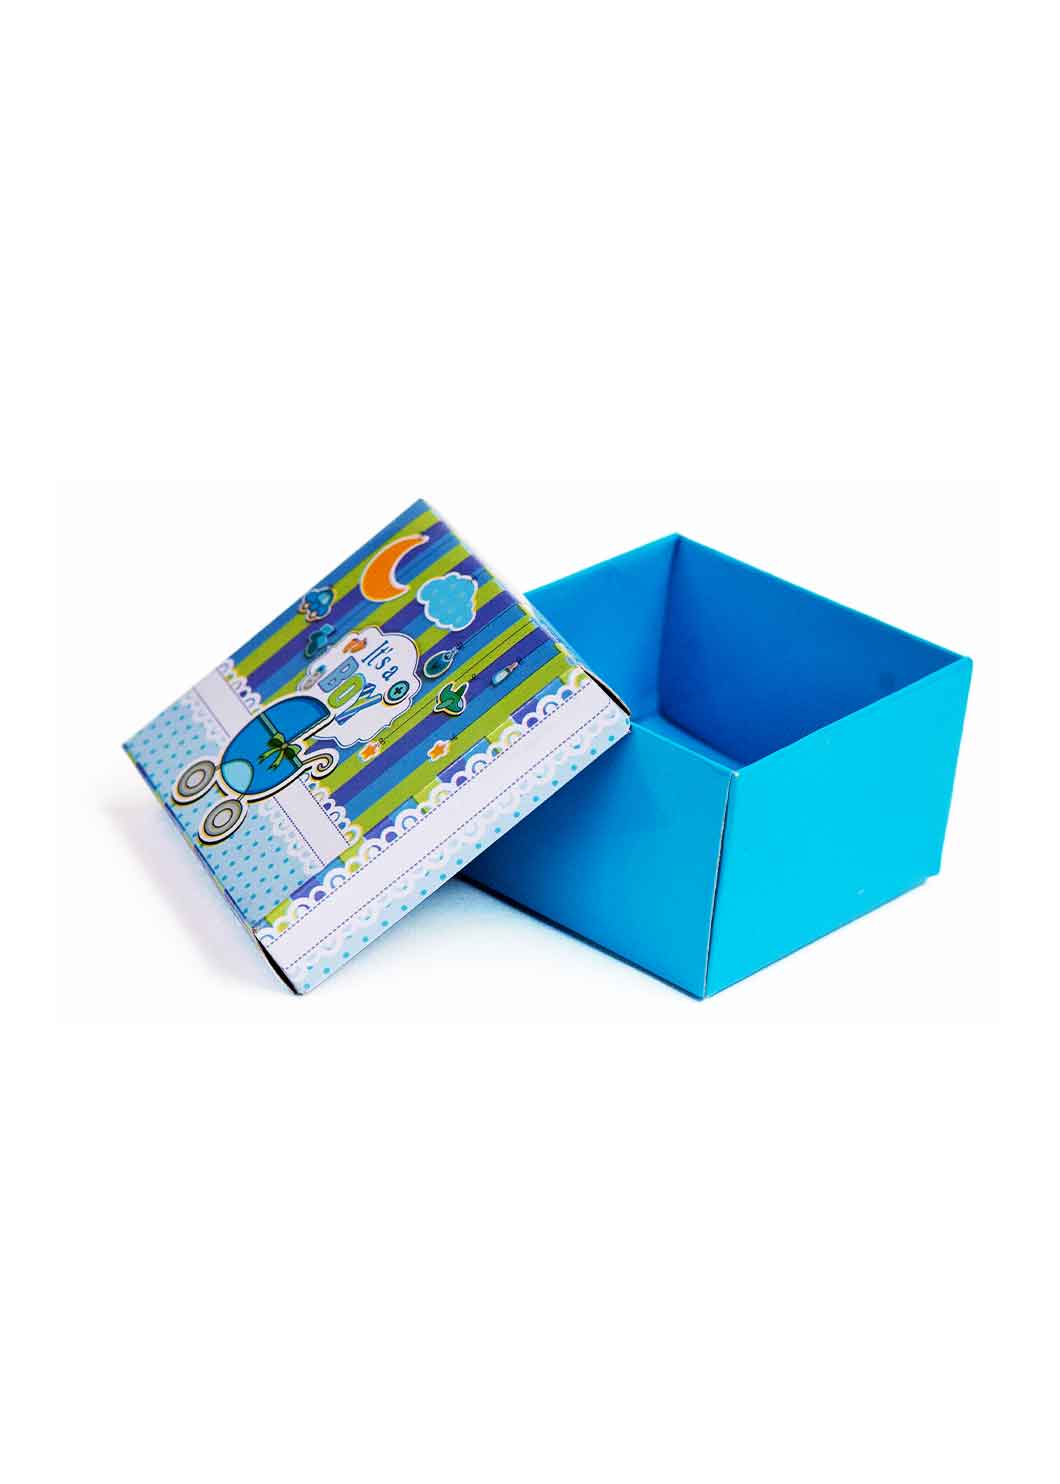 It's a Boy Baby Birthday Design Box for Packing - Baby Announcement Box